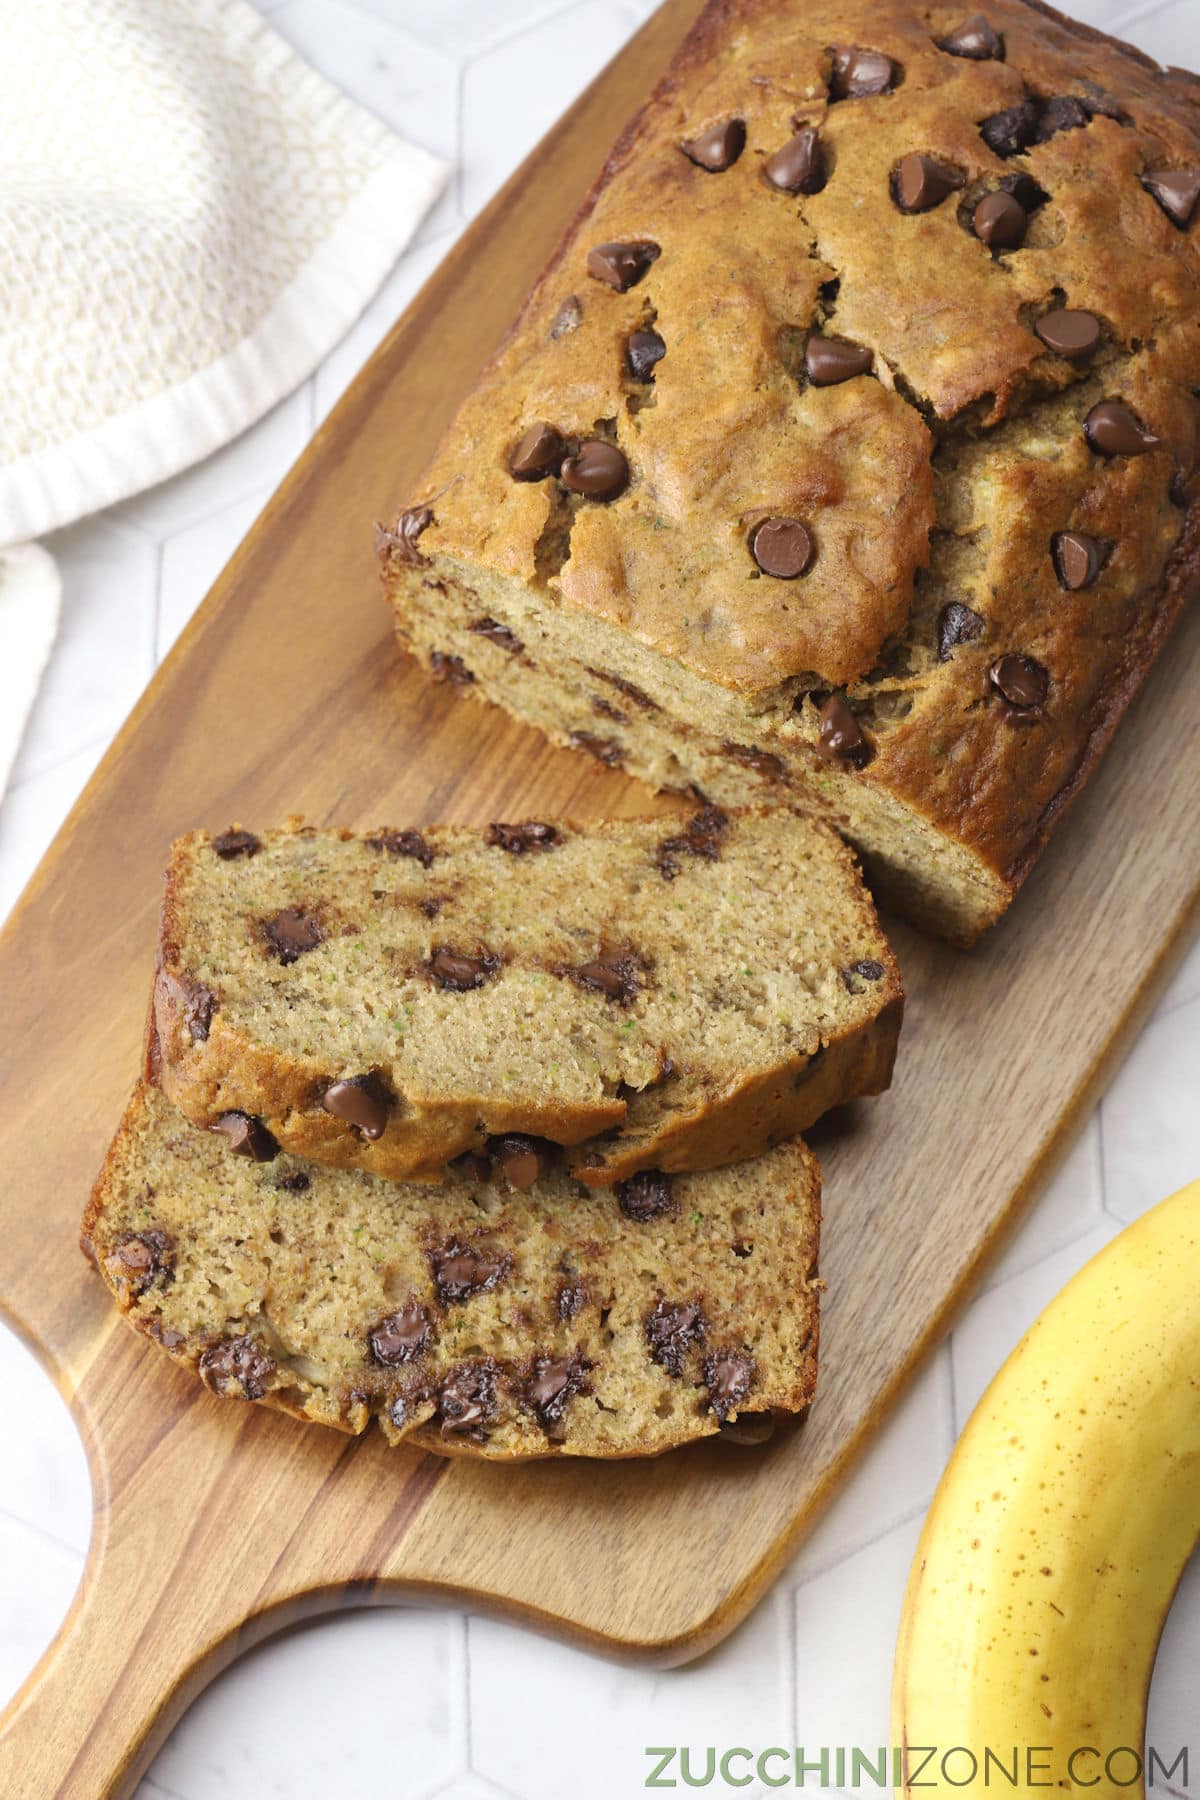 A loaf of chocolate chip banana zucchini bread on a wooden cutting board.